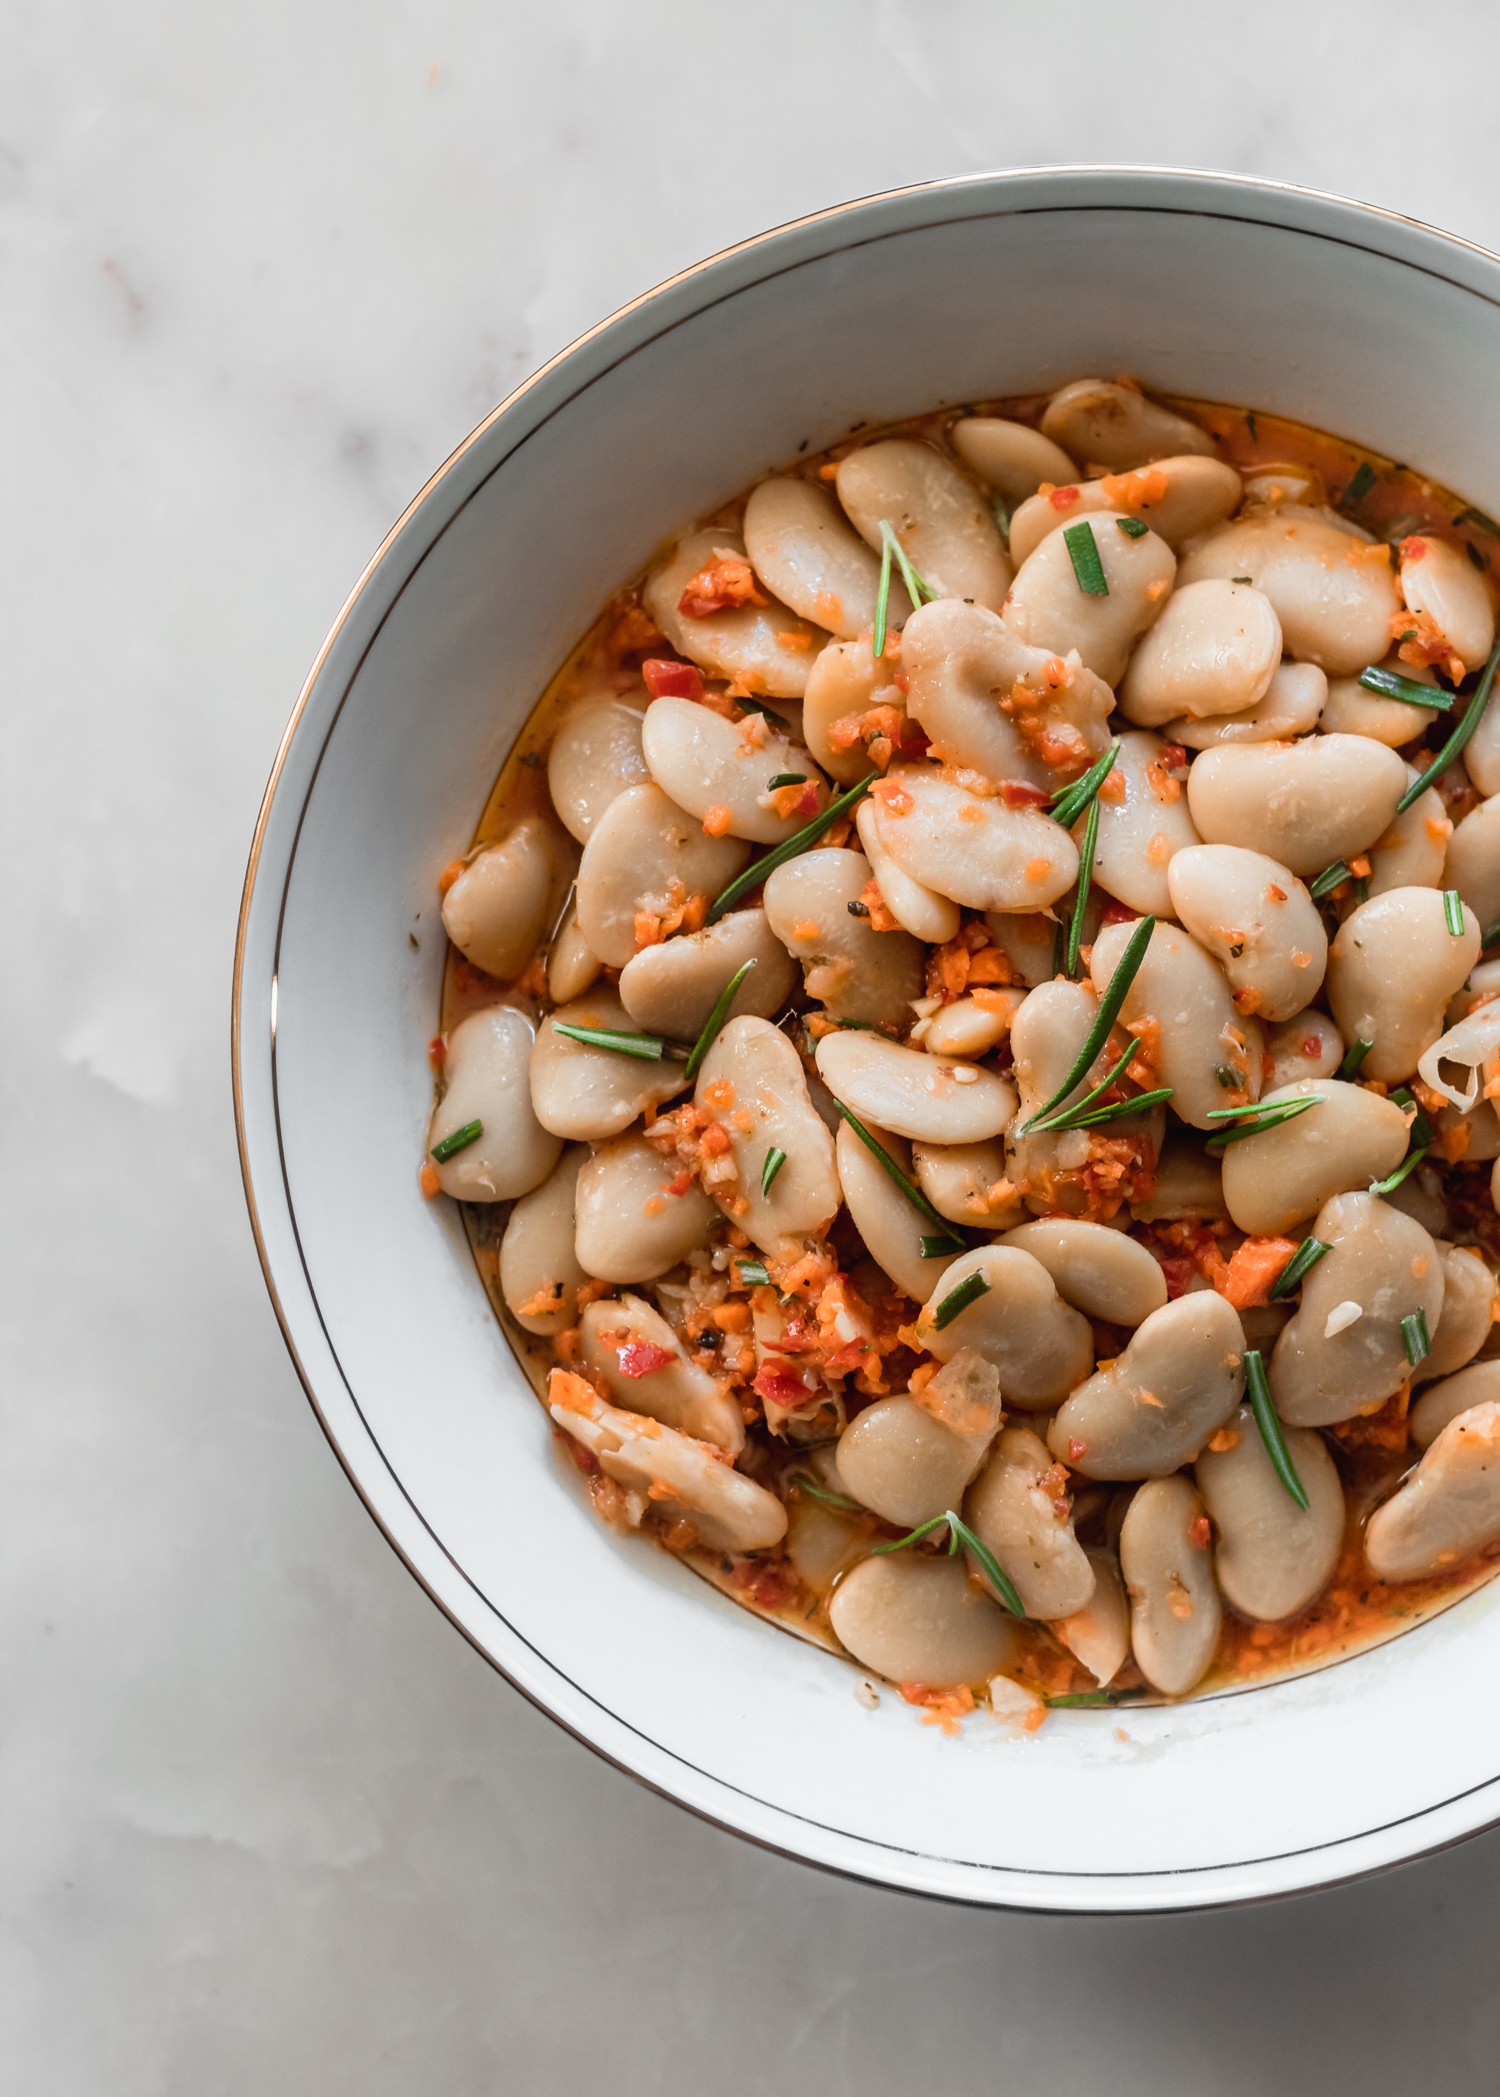 A white bowl filled with marinated white beans, vegetables, and chopped rosemary on a white counter.